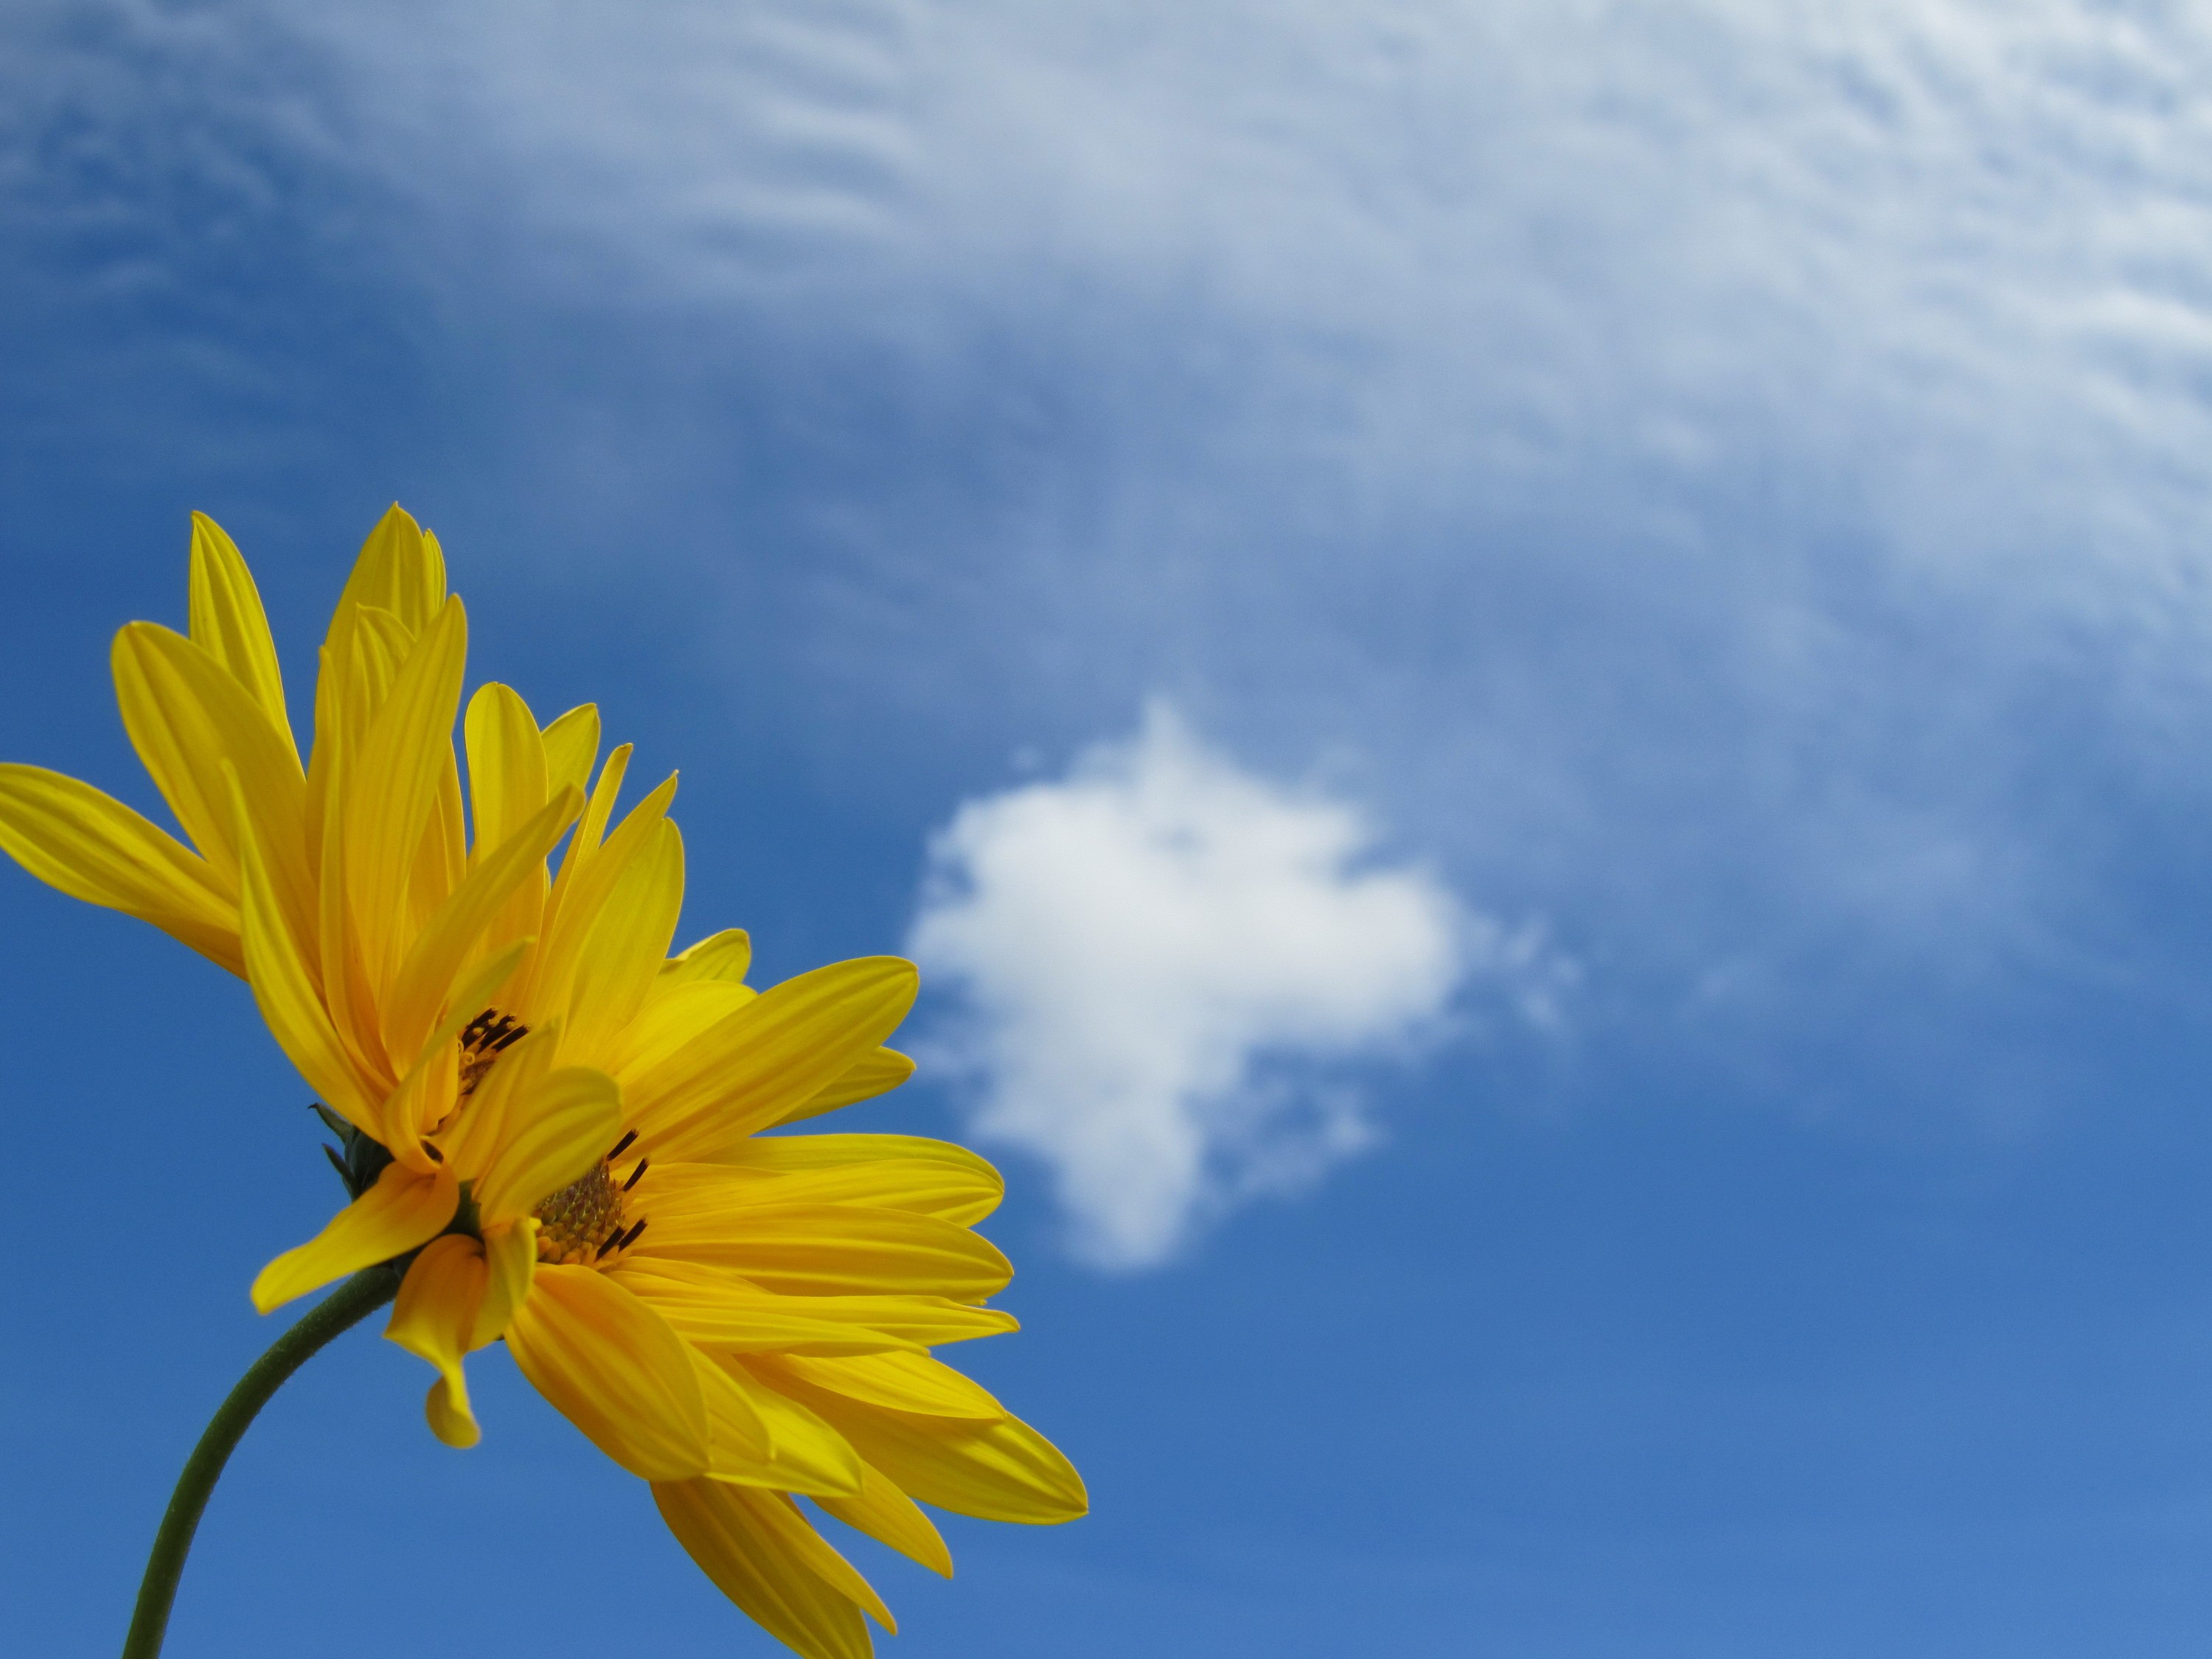 General 3000x2250 sky flowers clouds closeup plants yellow flowers worm's eye view